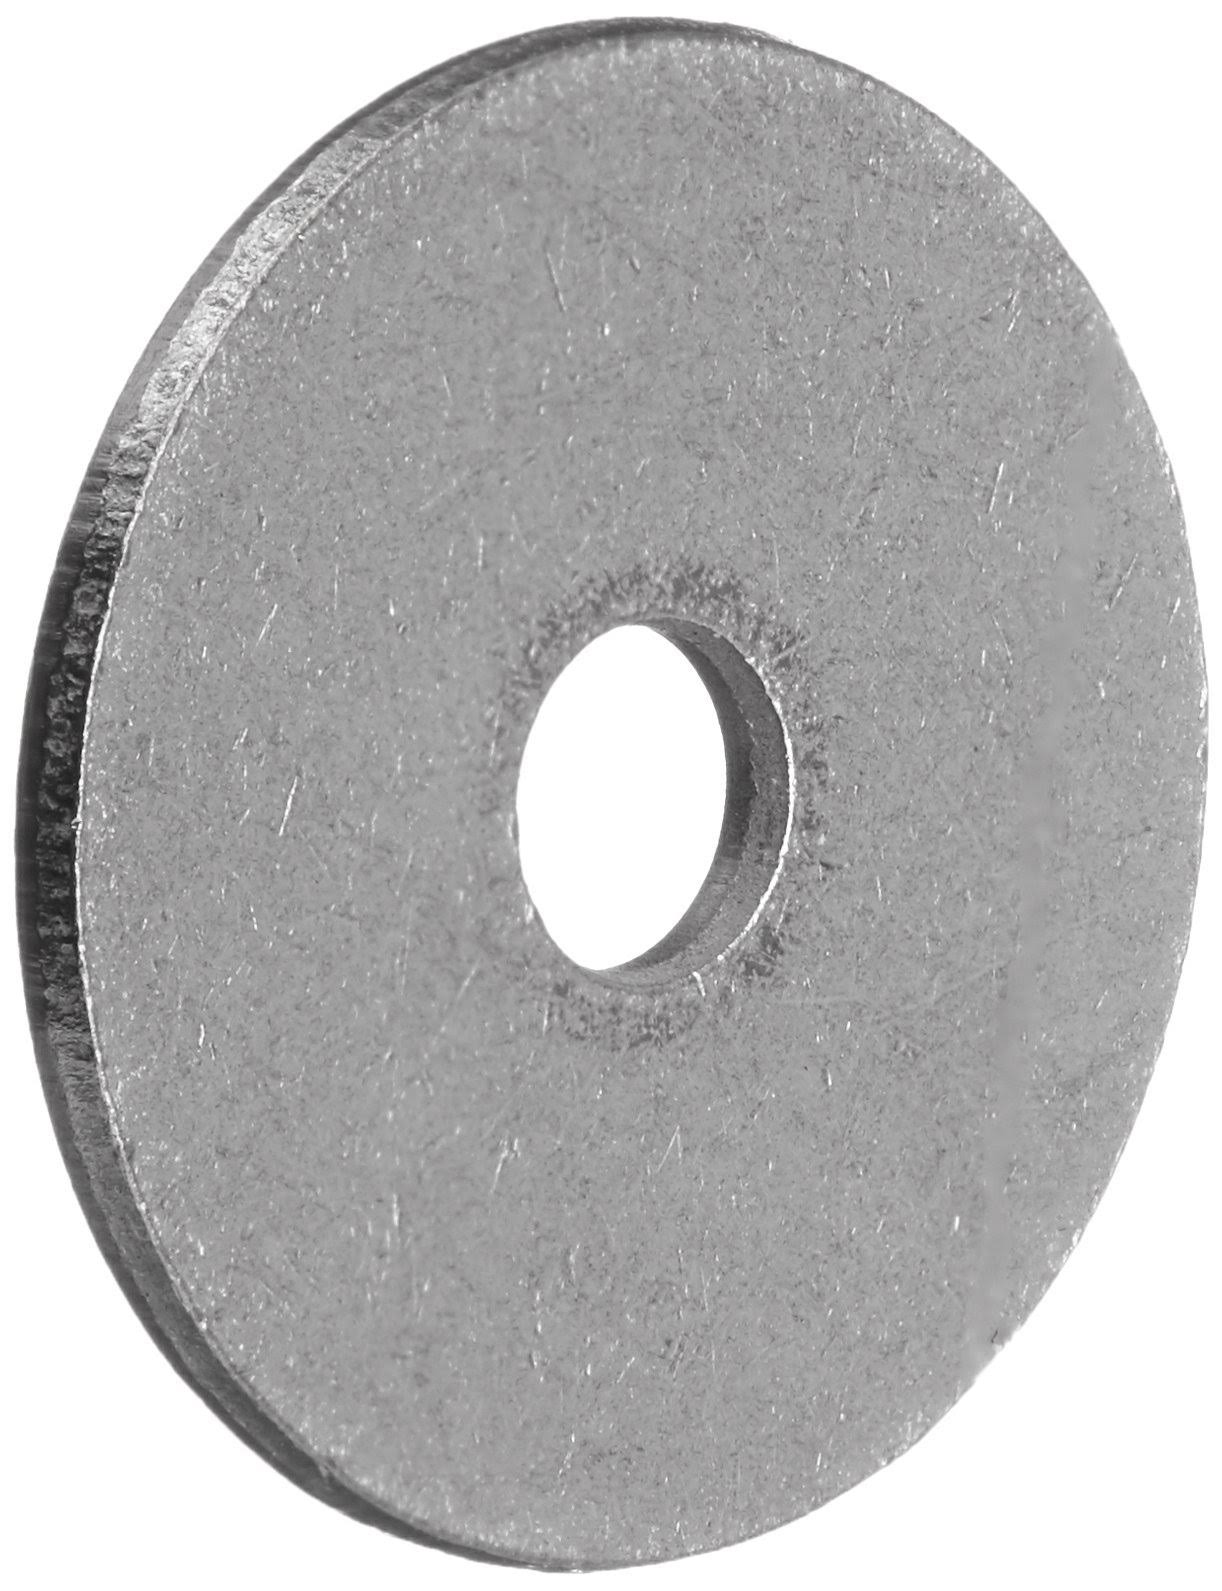 The Hillman Group Fender Washer - 100pk, Stainless Steel, 5/32" x 7/8"